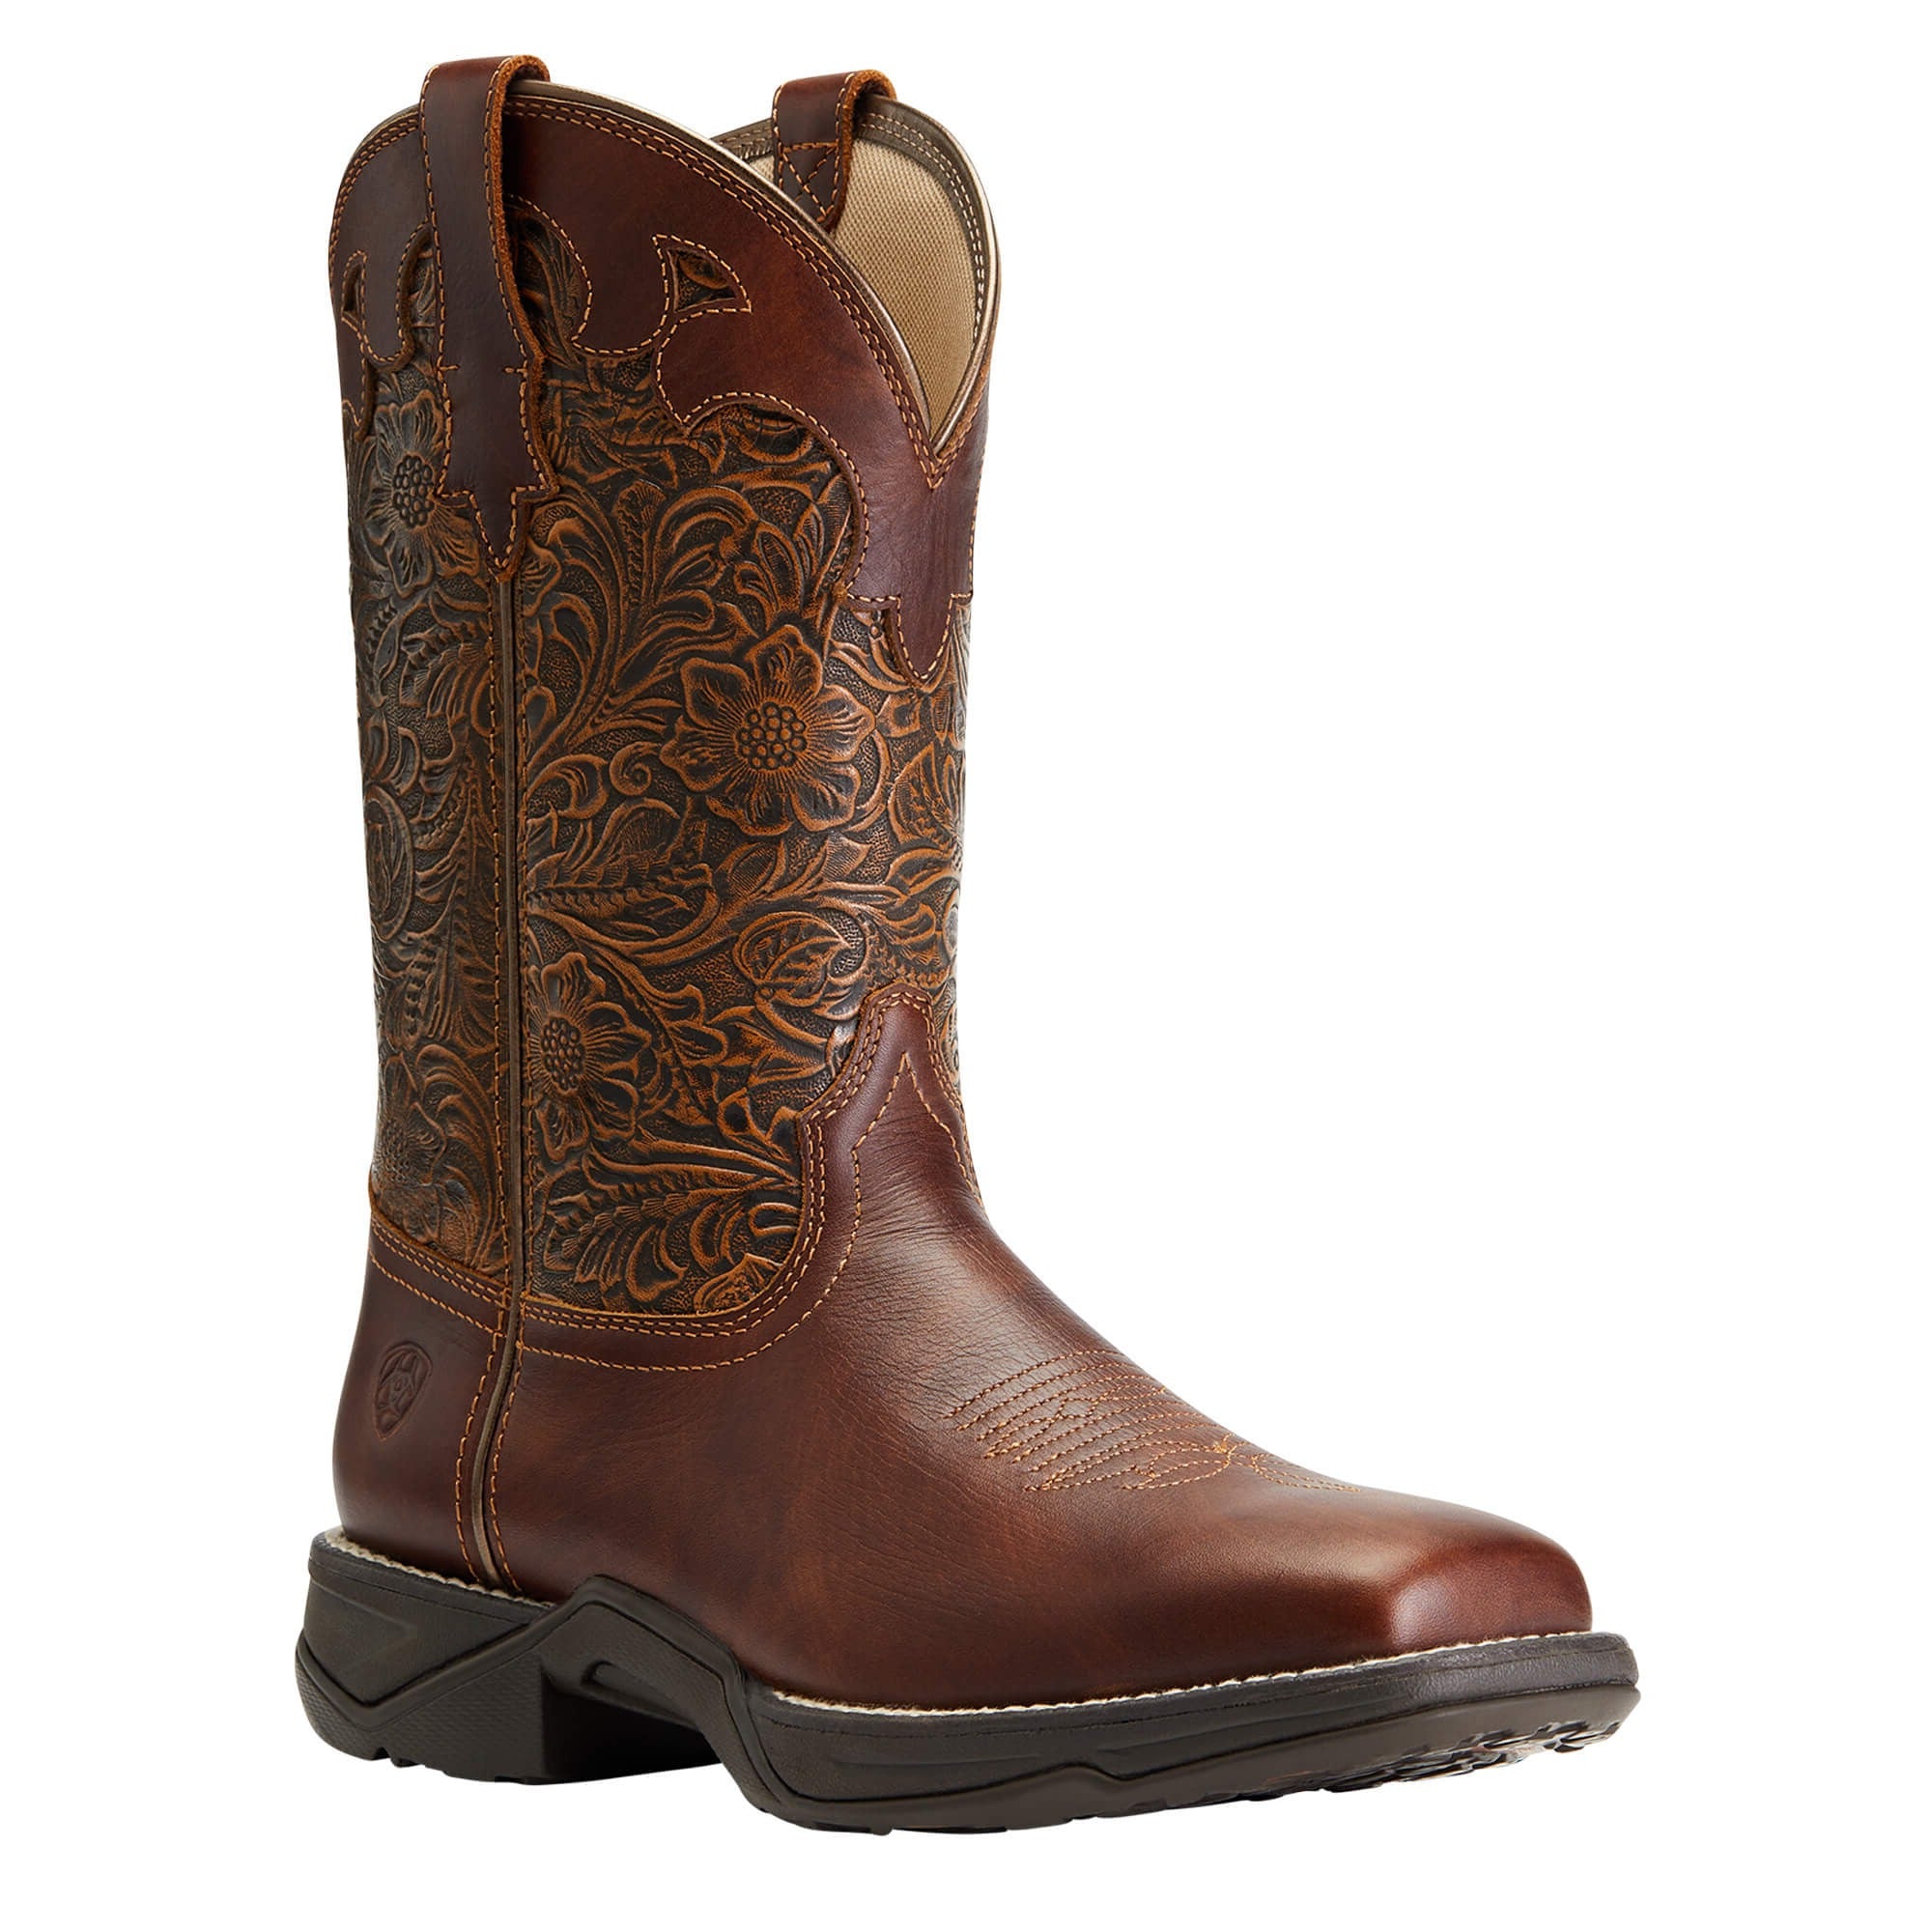 Women's Ariat Anthem Boots - Square Toe